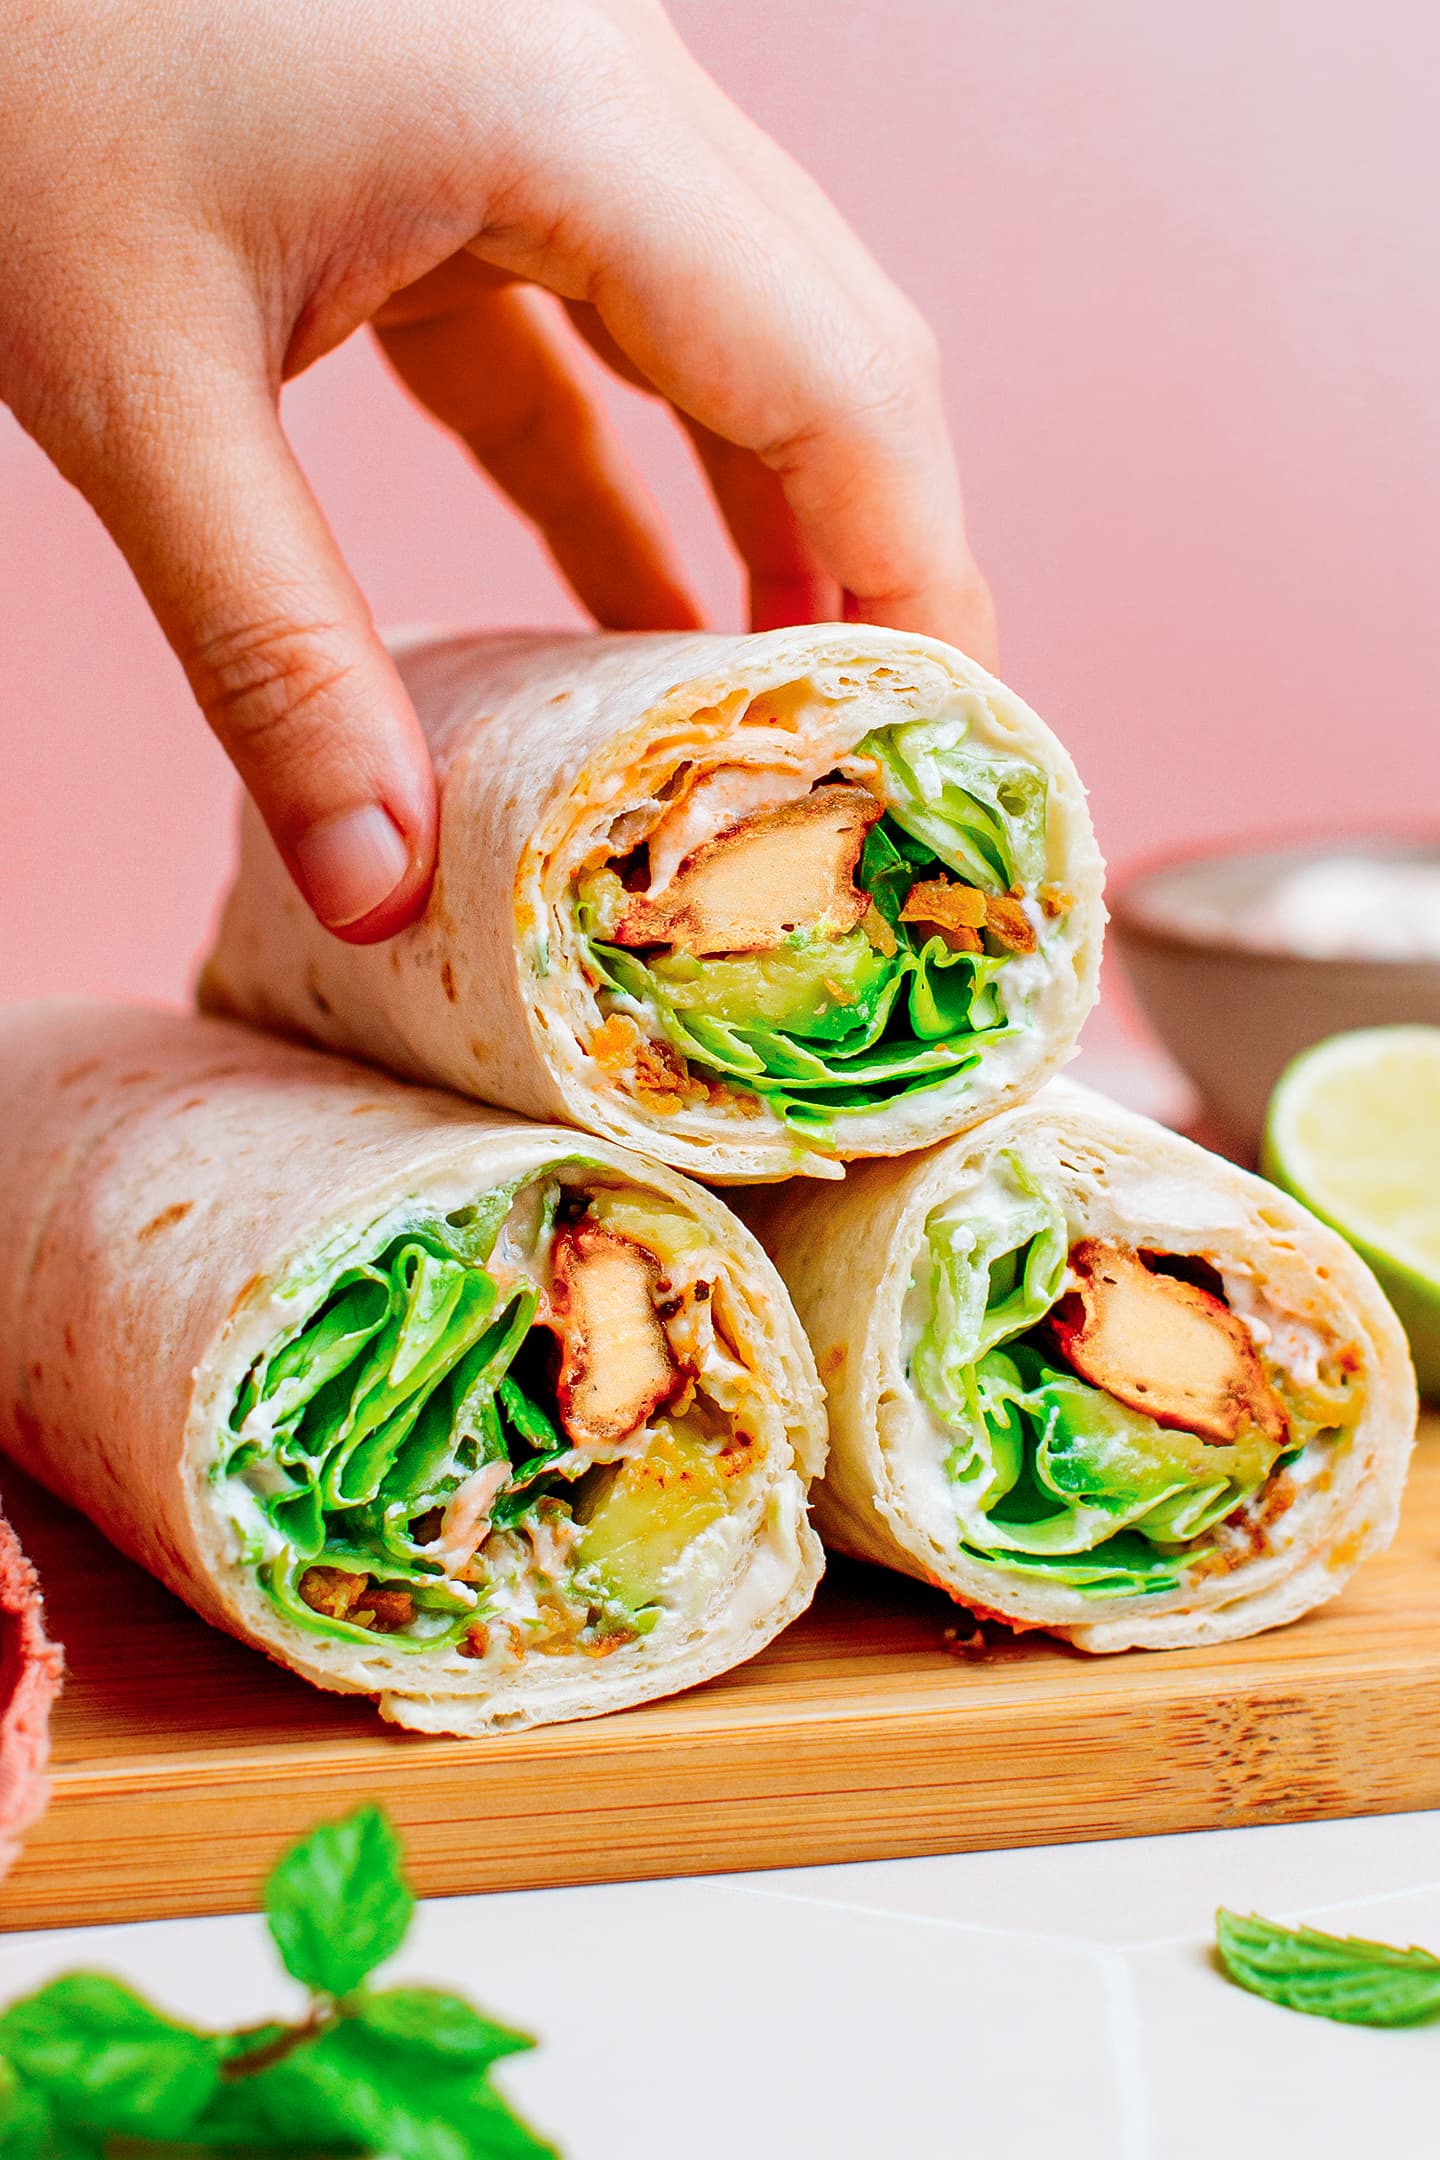 Holding a vegan wrap filled with vegan chicken, cream cheese, and lettuce.